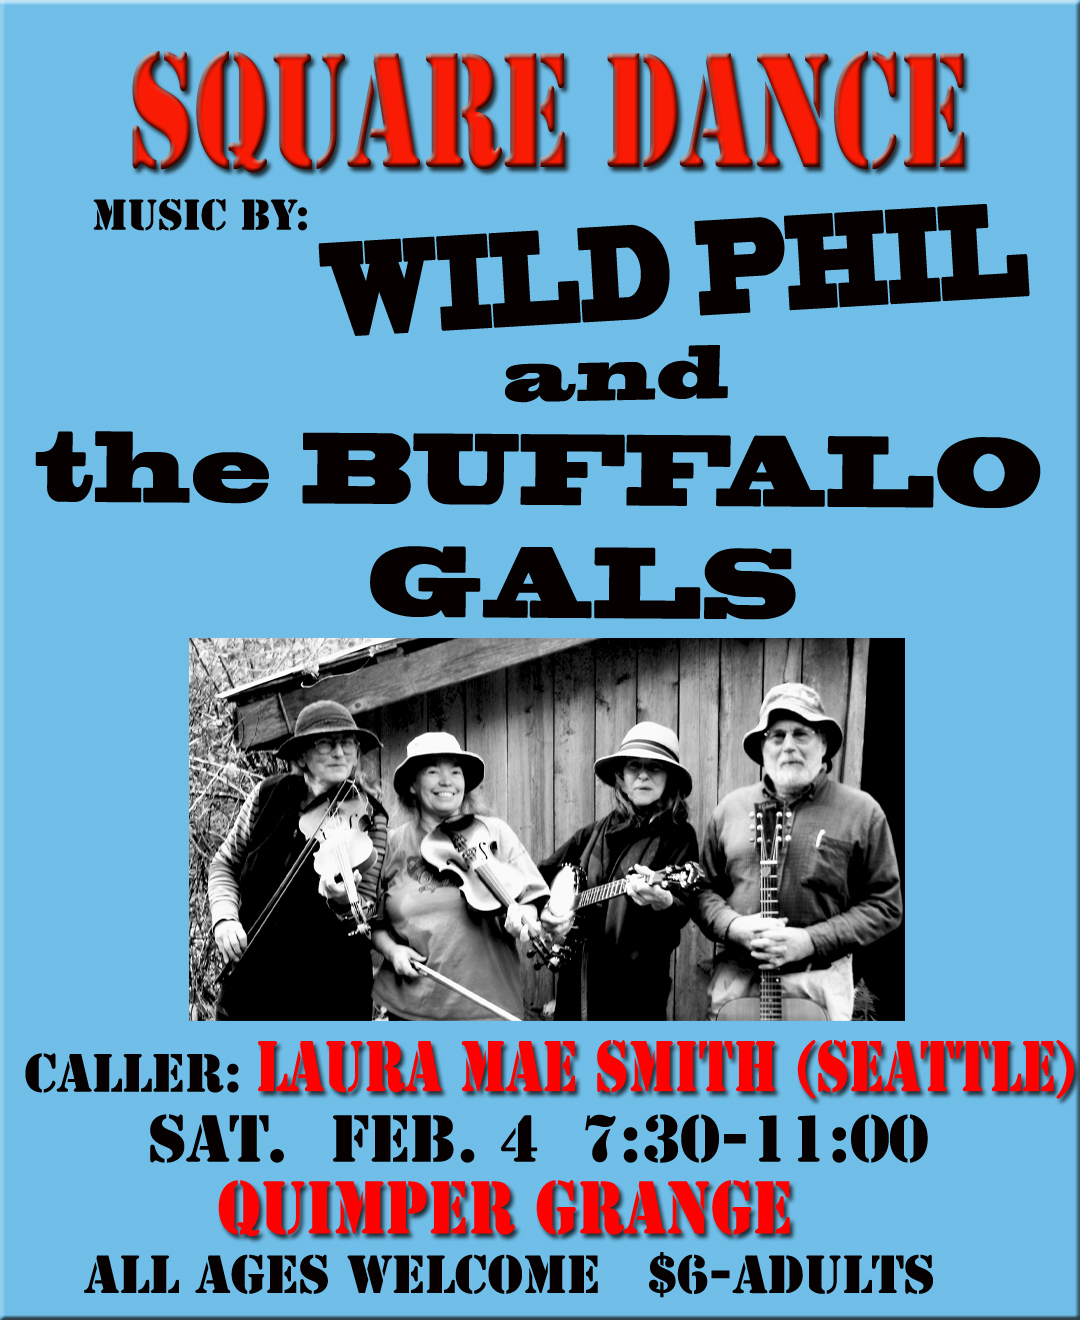 Quimper Grange # First Saturday Square Dance at Quimper Grange in February features Wild Phil the Buffalo Gals with caller Laura Me Smith.